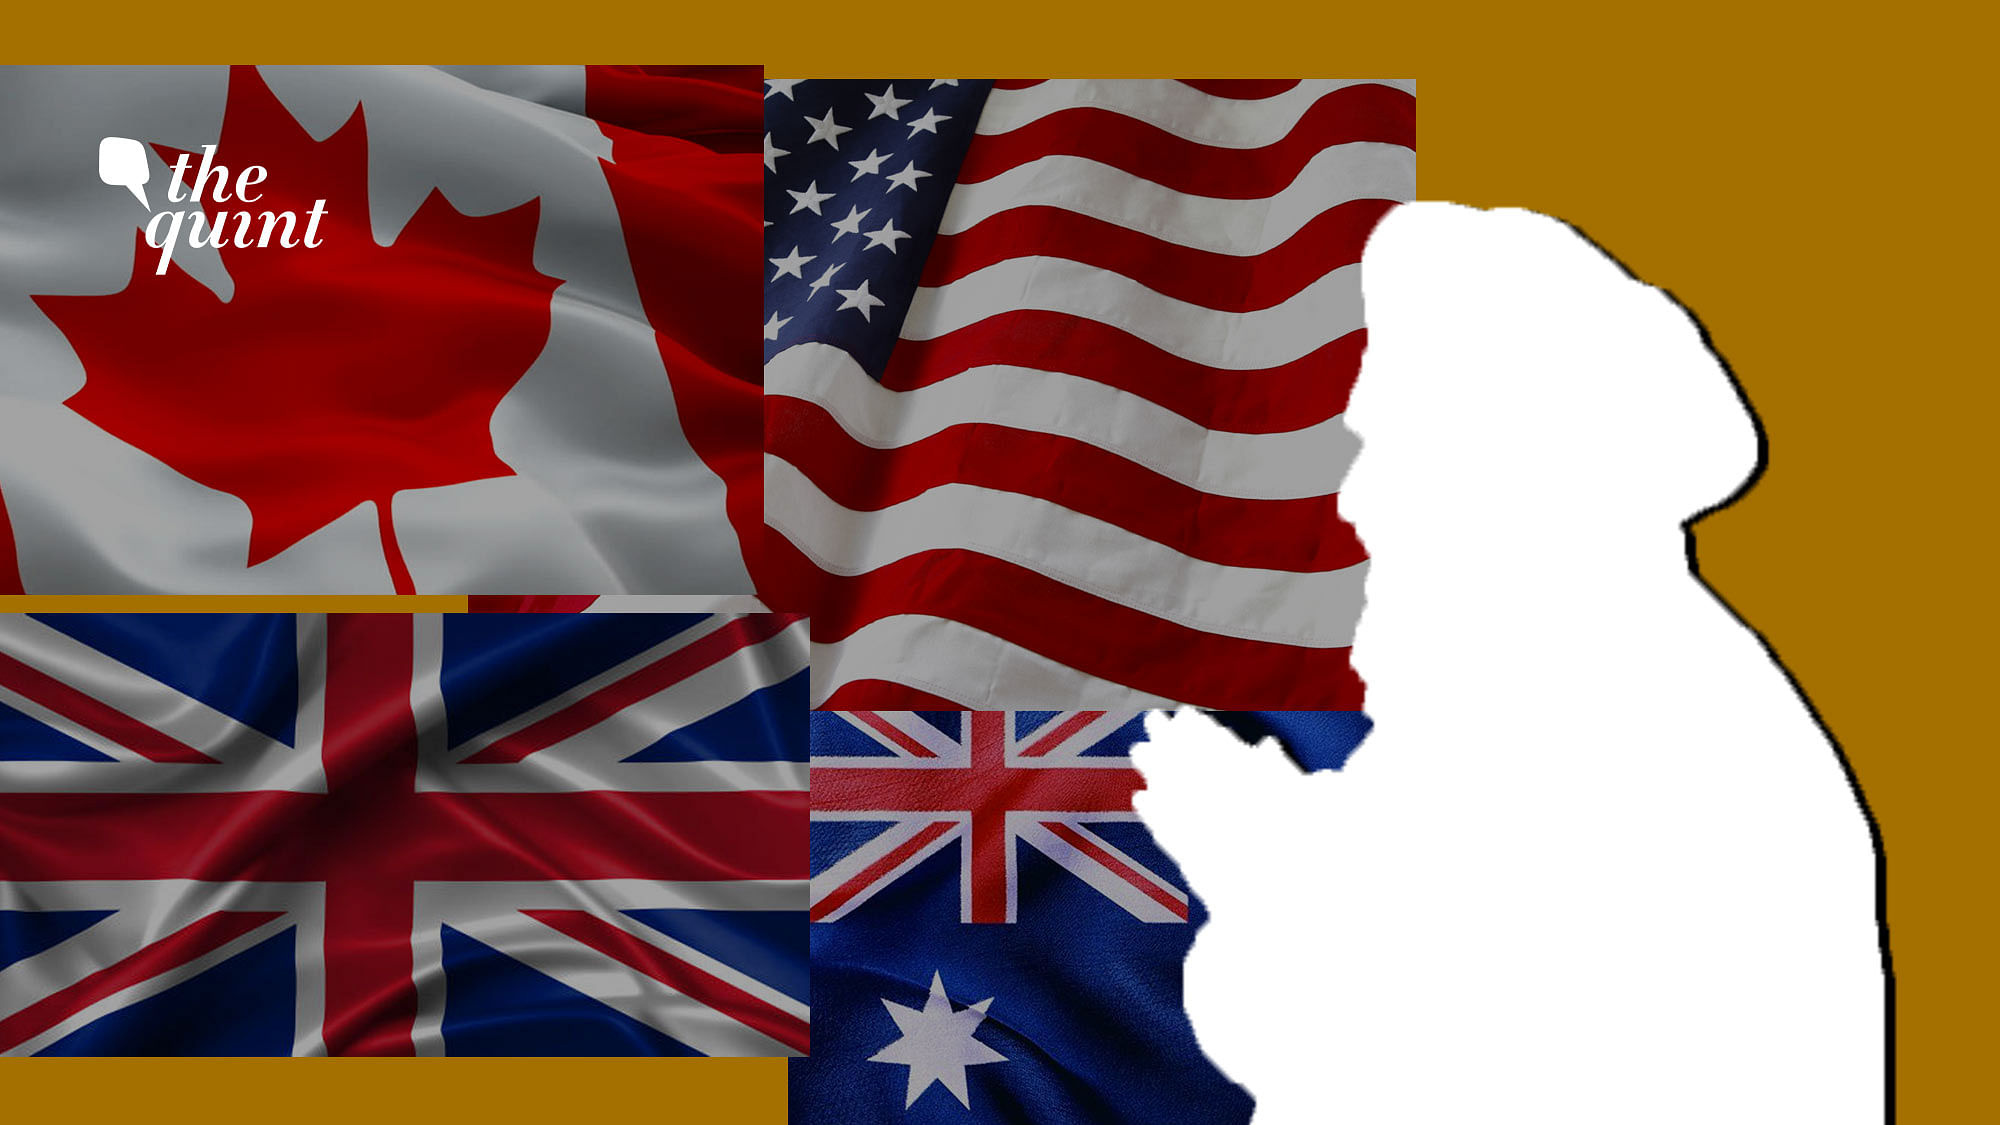 Flags of Canada, US, Australia and UK (clockwise from top left), along with the silhouette of a Sikh man, used for representational purposes.